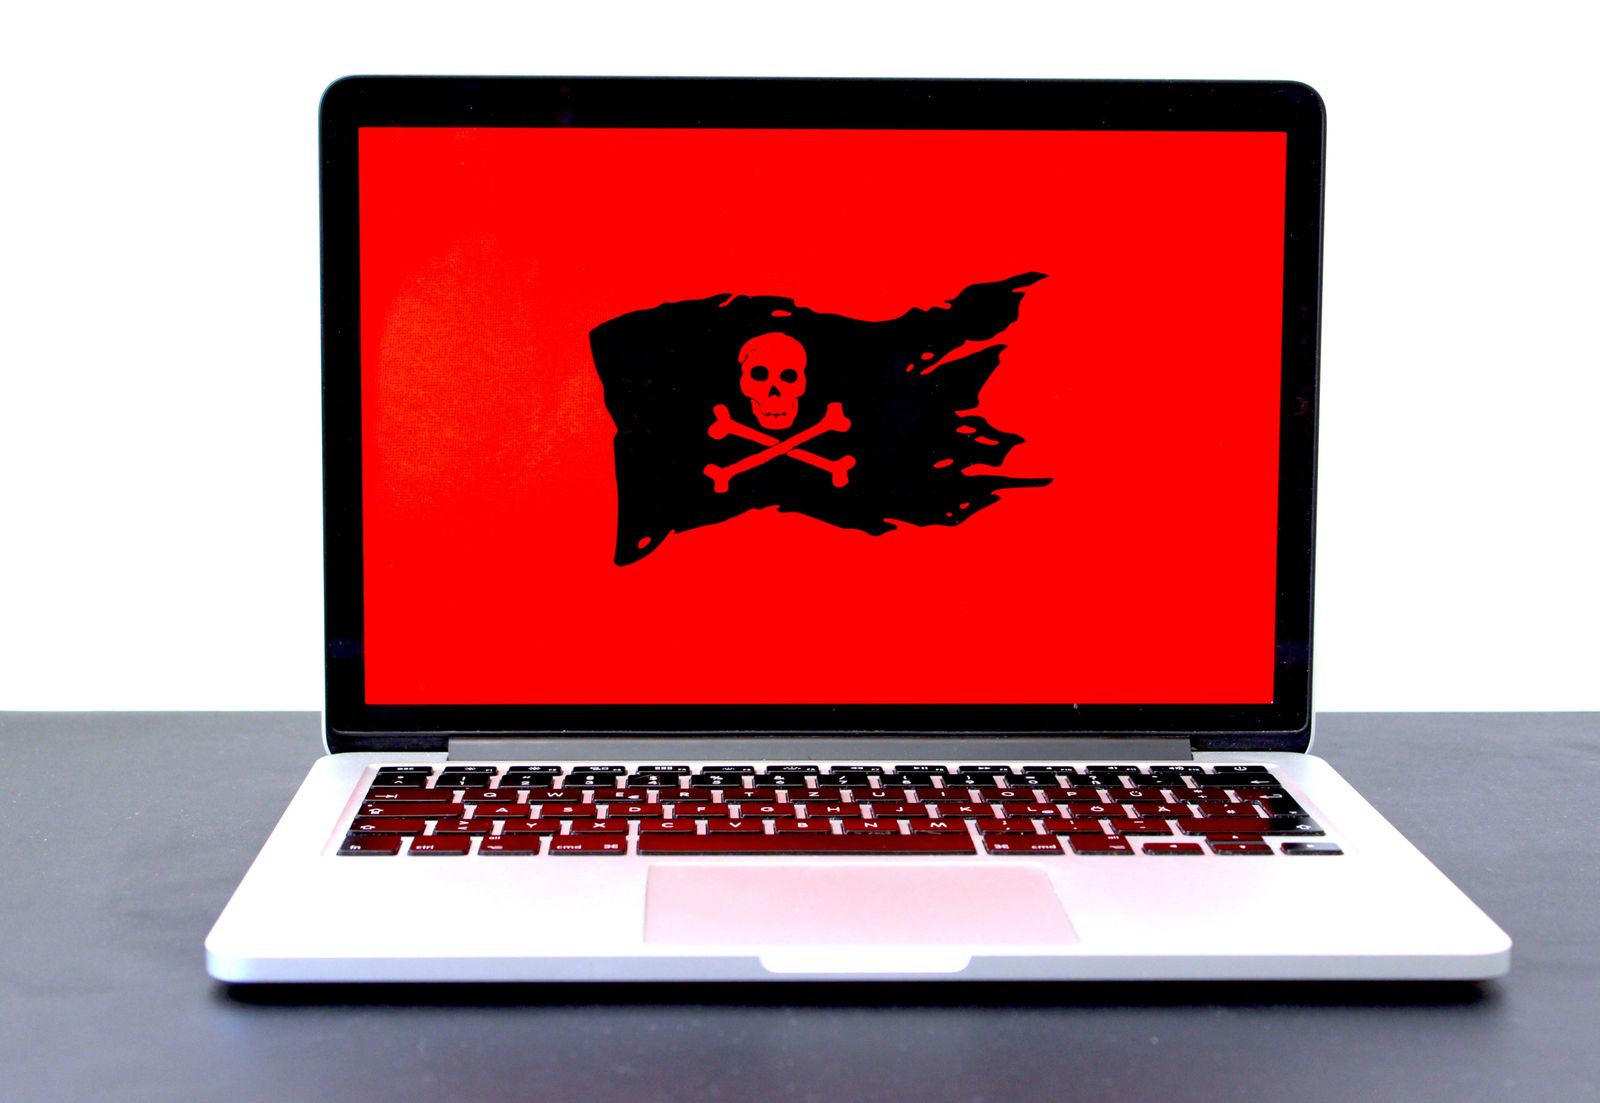 A Mendix SDK Primer — Part 2_image of a laptop with a red screen and a pirate flag indicating something didn't work out